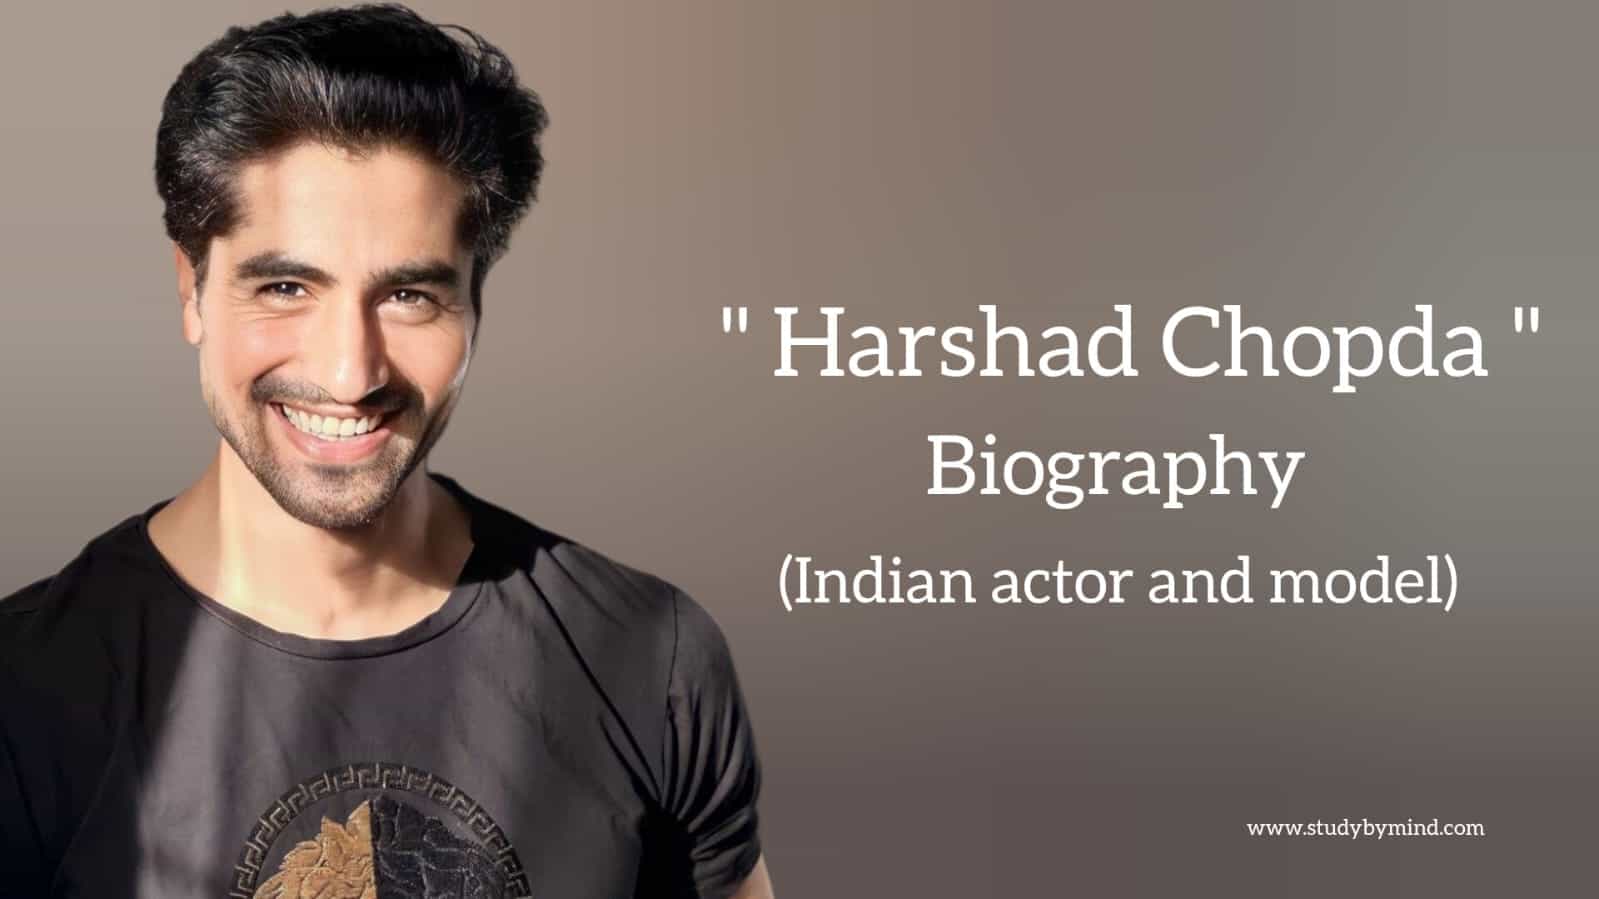 You are currently viewing Harshad chopda biography in english (Indian Actor)